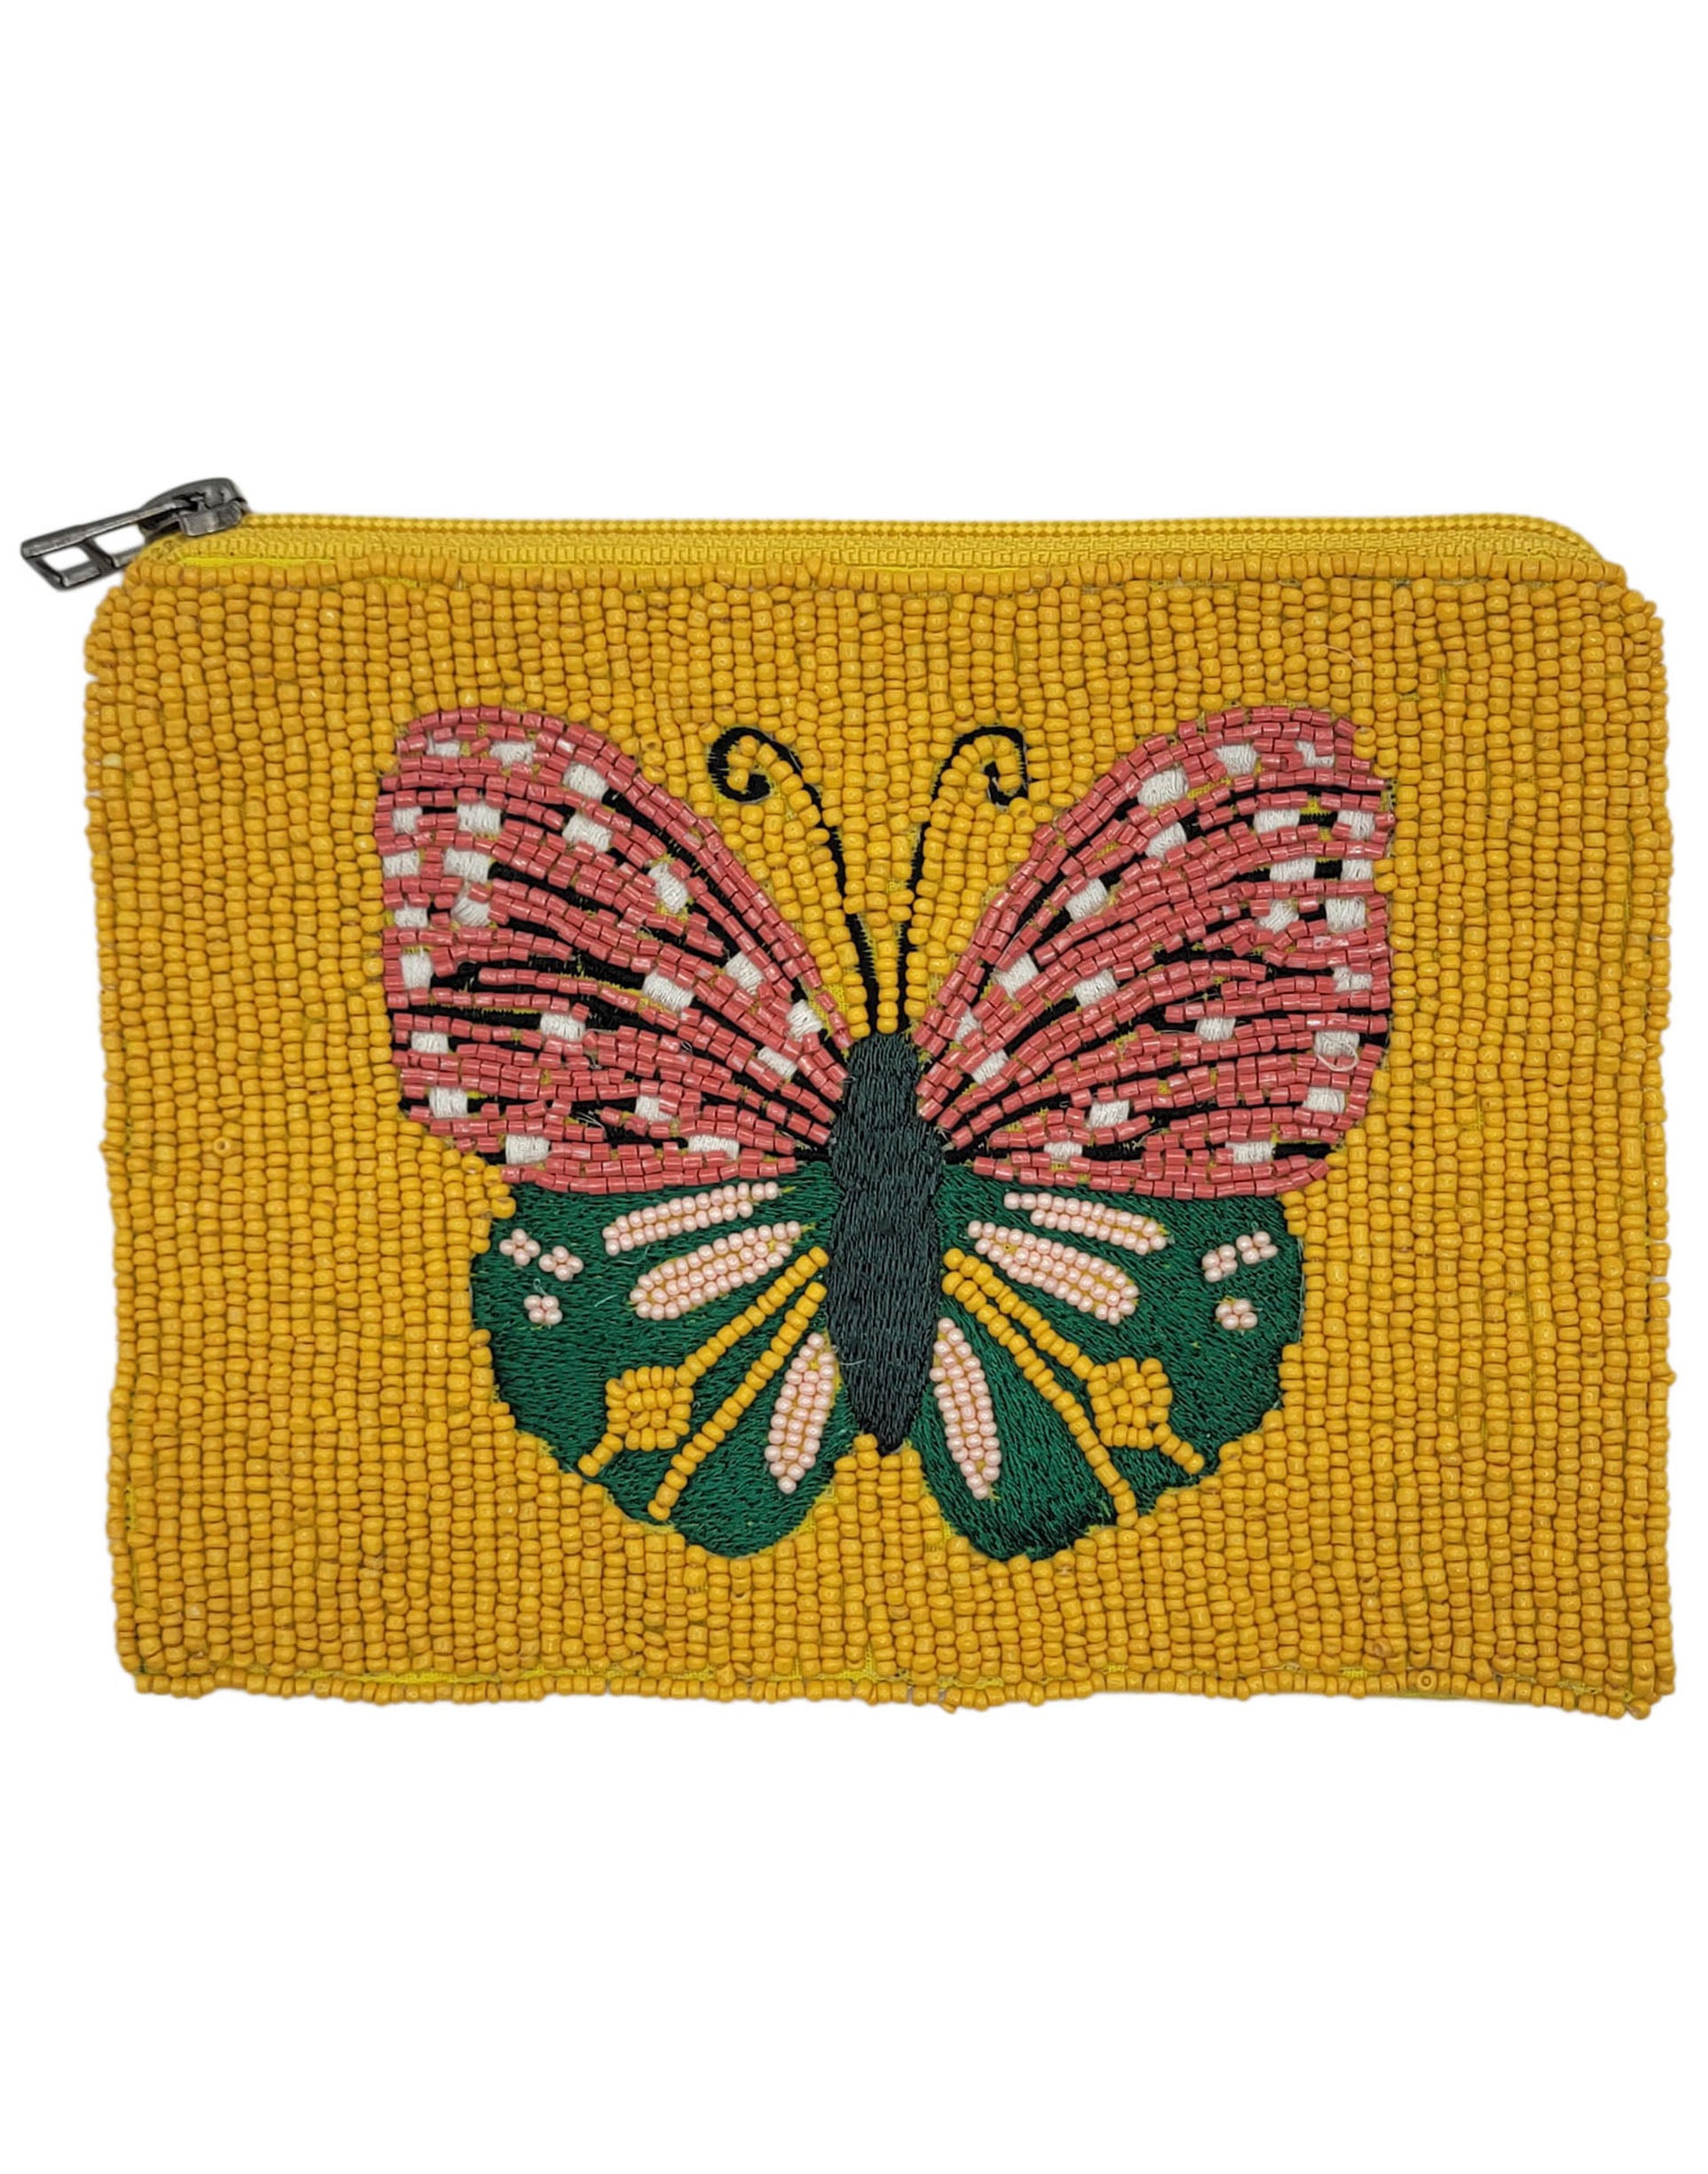 YELLOW BUTTERFLY POUCH